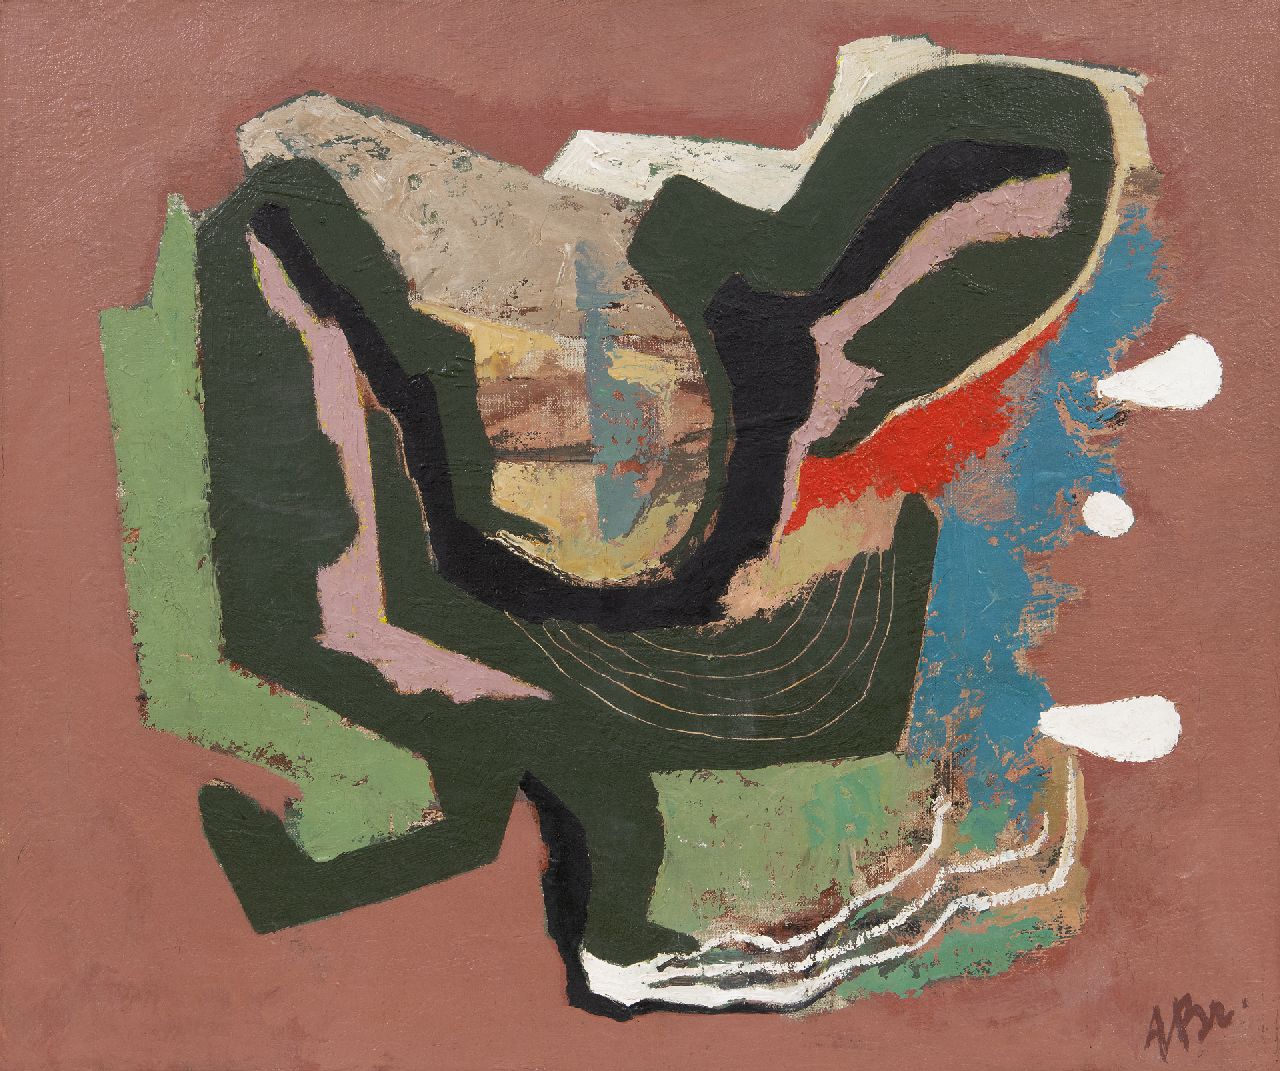 Breetvelt A.  | Adolf 'Dolf' Breetvelt | Paintings offered for sale | Abstract, oil on canvas 50.3 x 60.3 cm, signed l.r. and on the stretcher and to be dated end 1940's